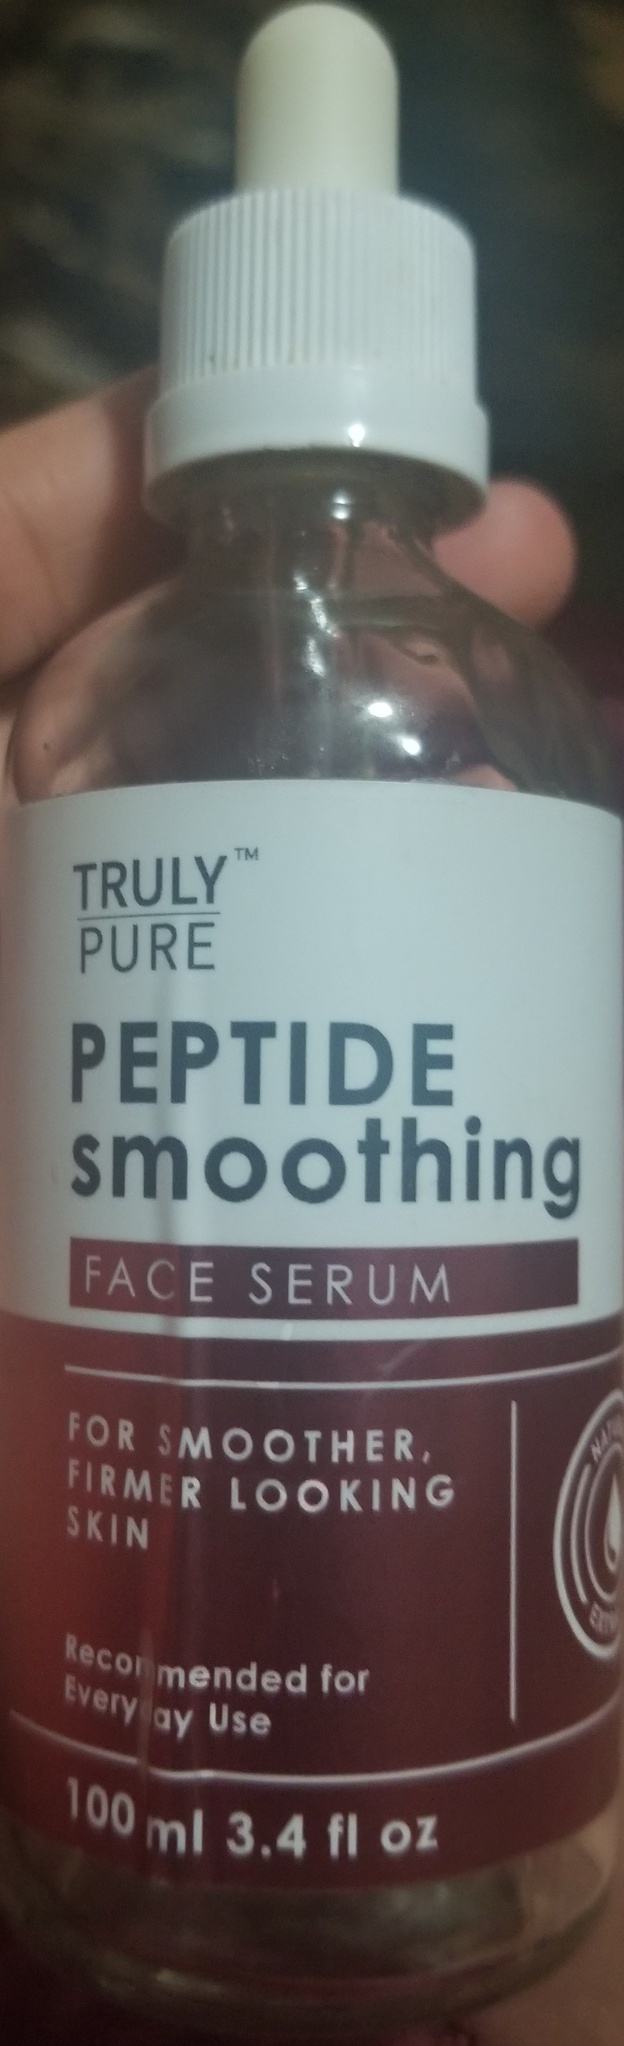 Truly Pure Peptide Smoothing Face Serum